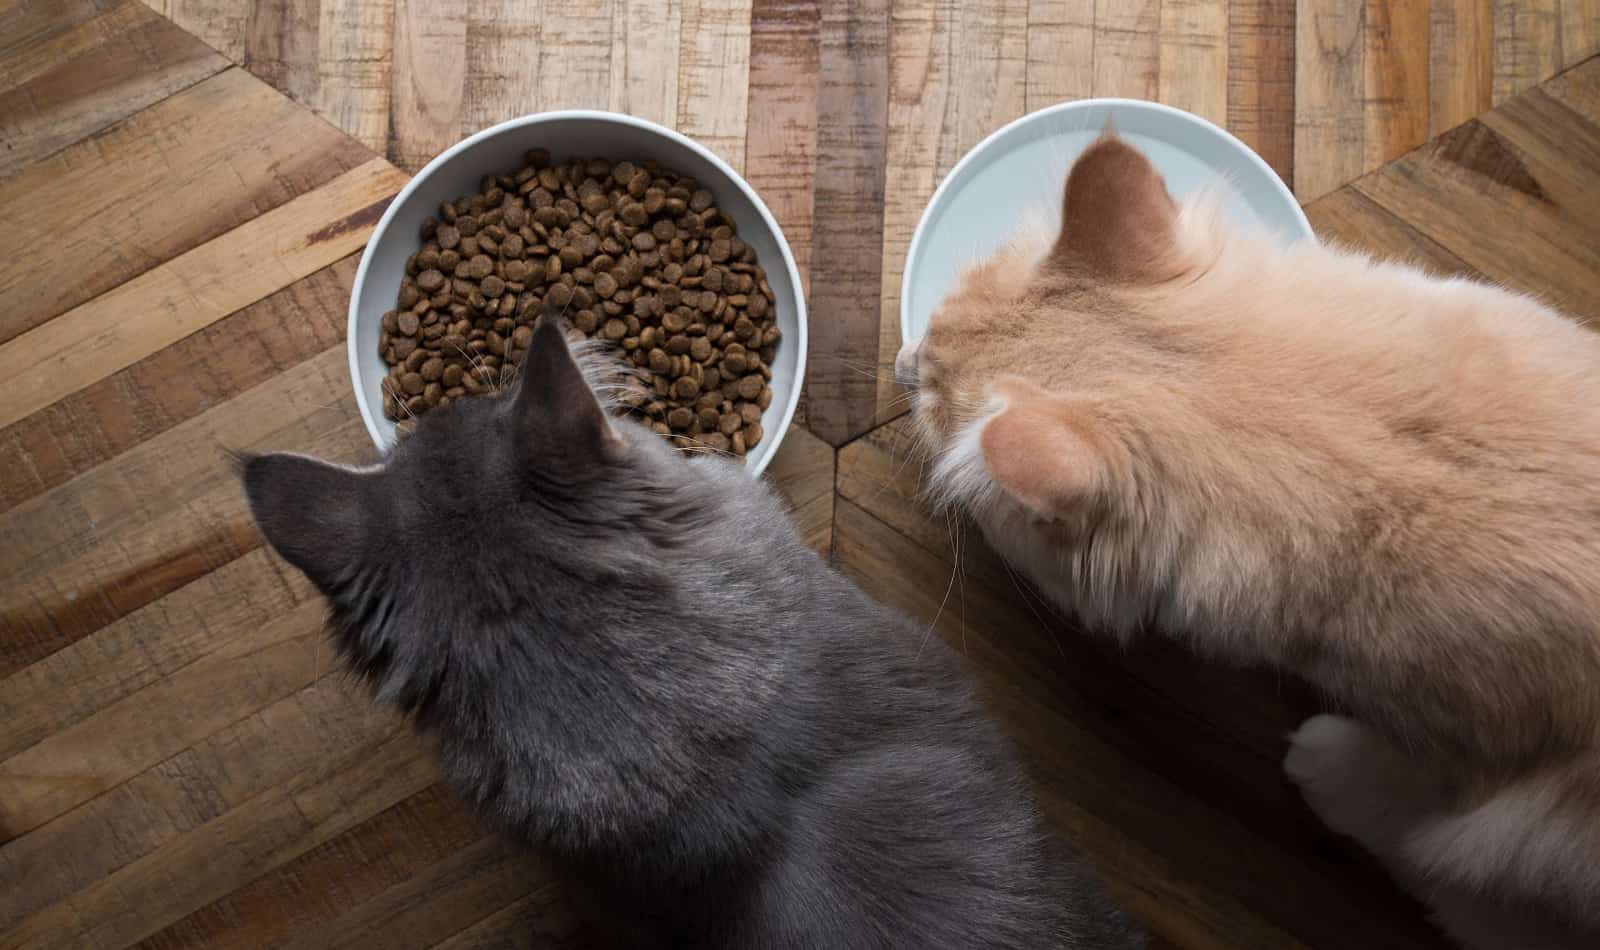 Need to know how to set up your house for two cats or more? Read on for our complete guide, including apartment tips!